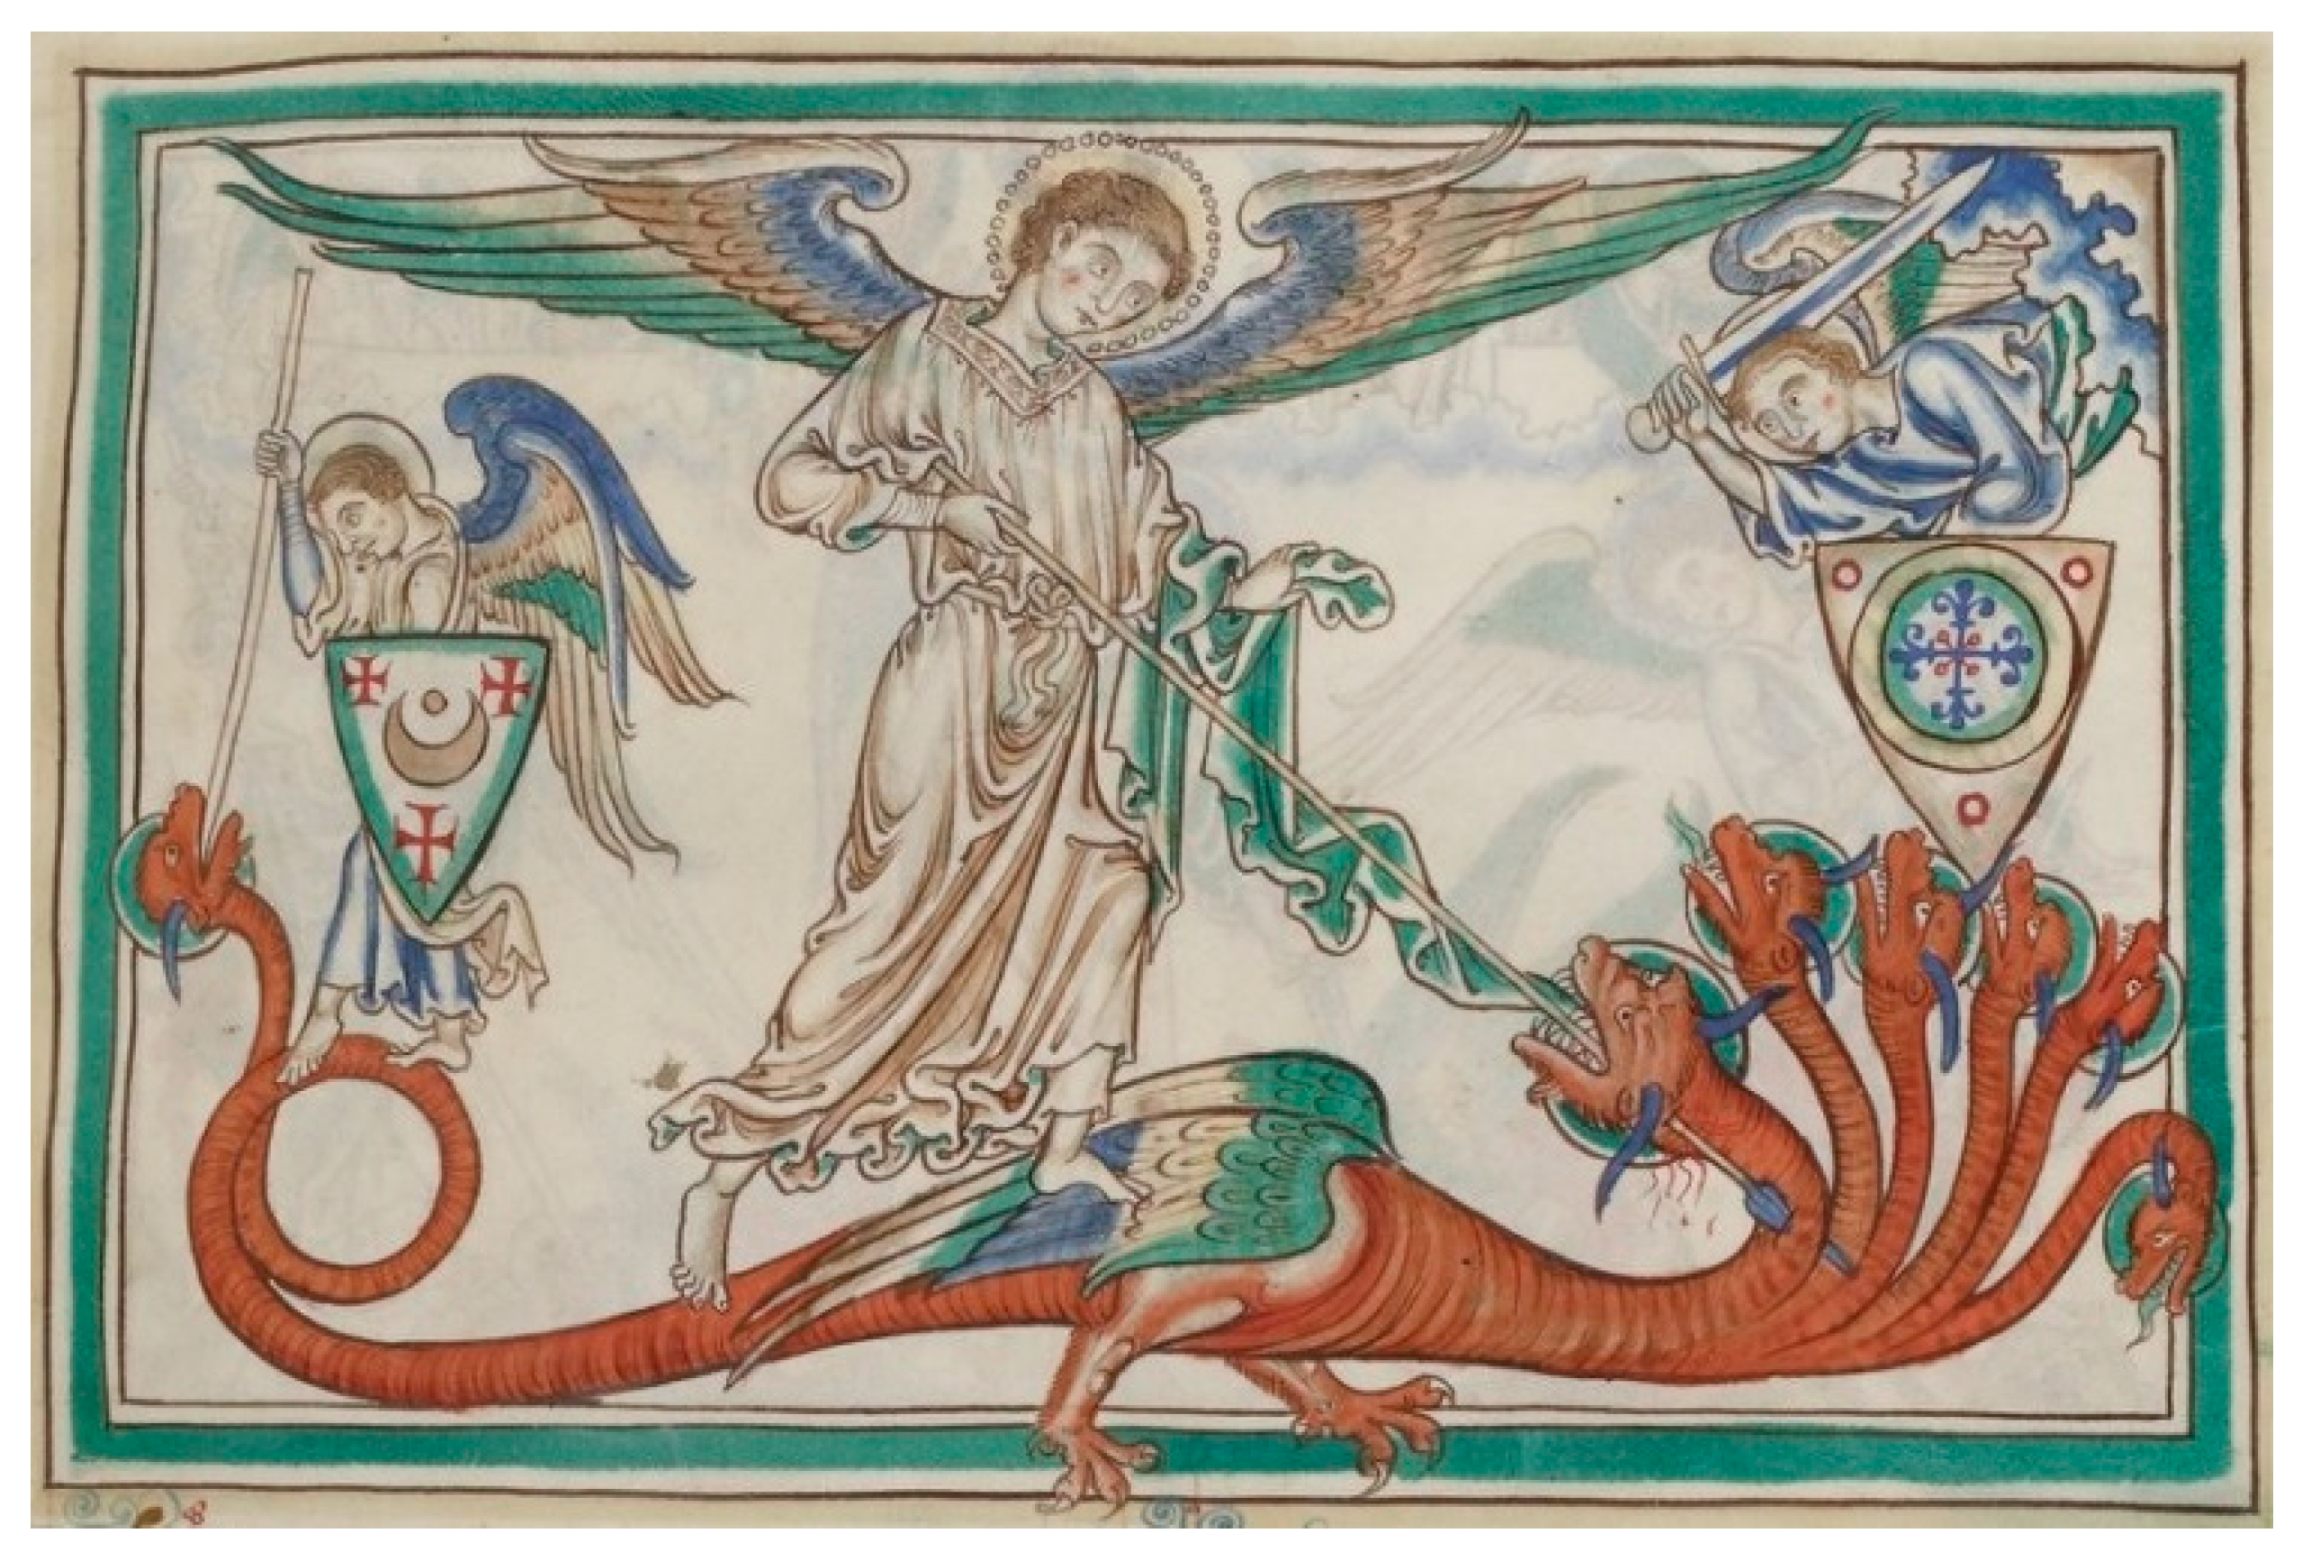 Angels in antiquity: Judaism's long relationship with heaven's haloed  helpers